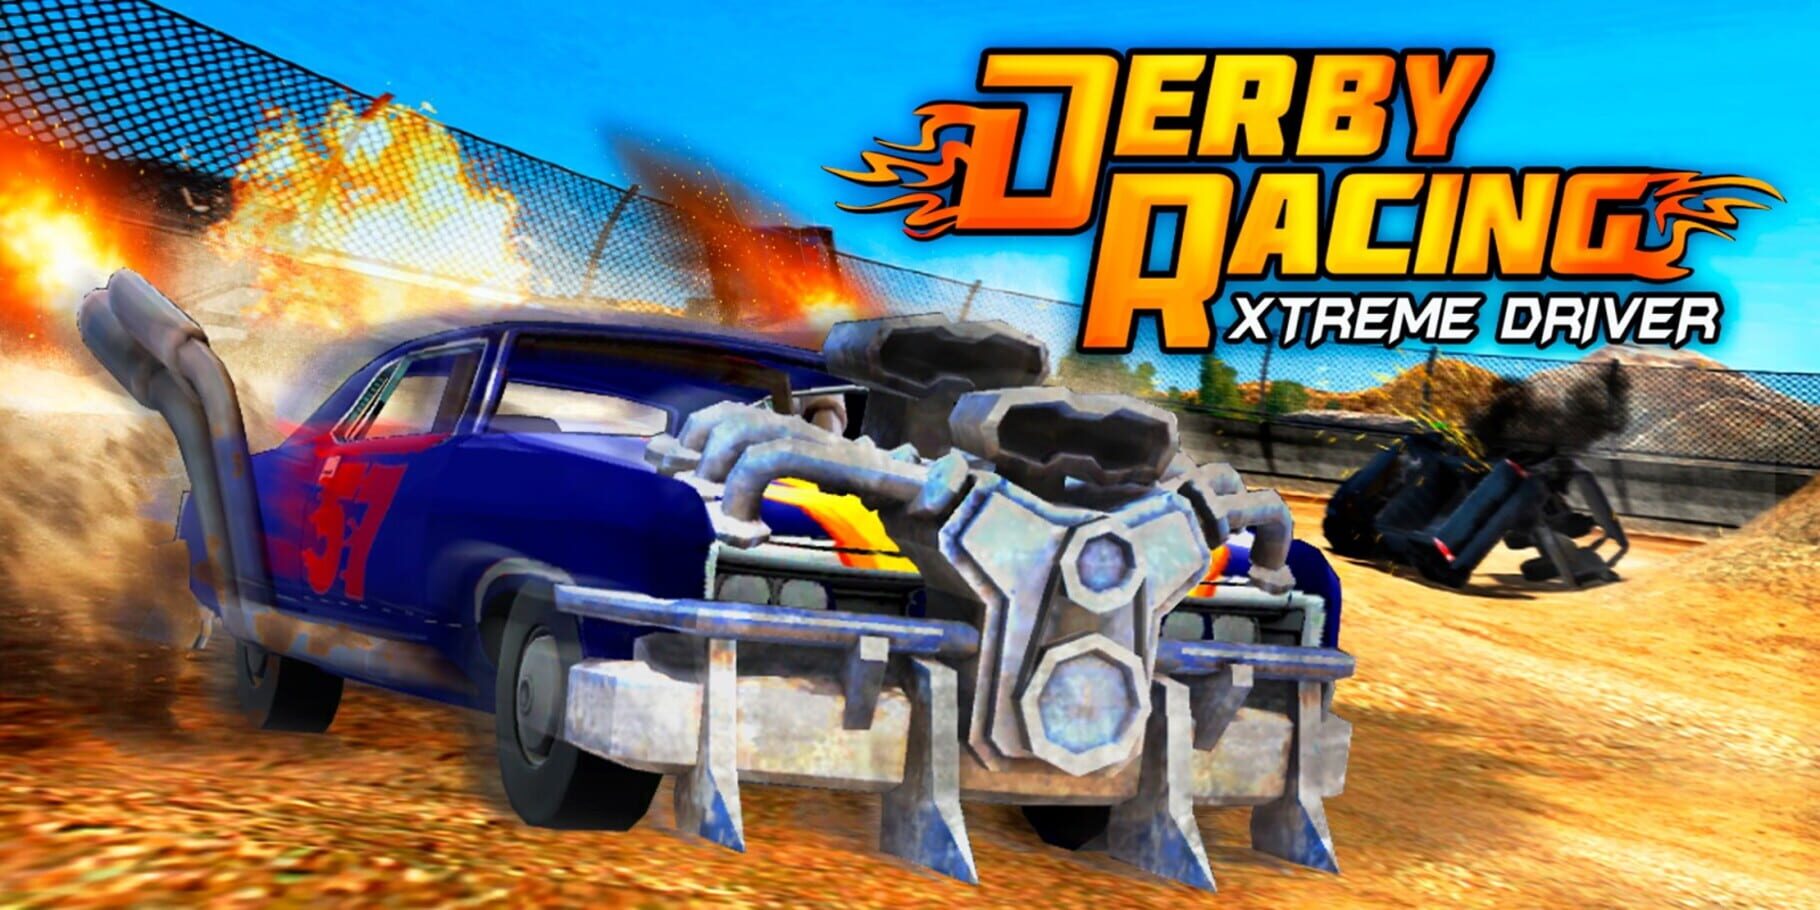 Derby Racing: Xtreme Driver artwork